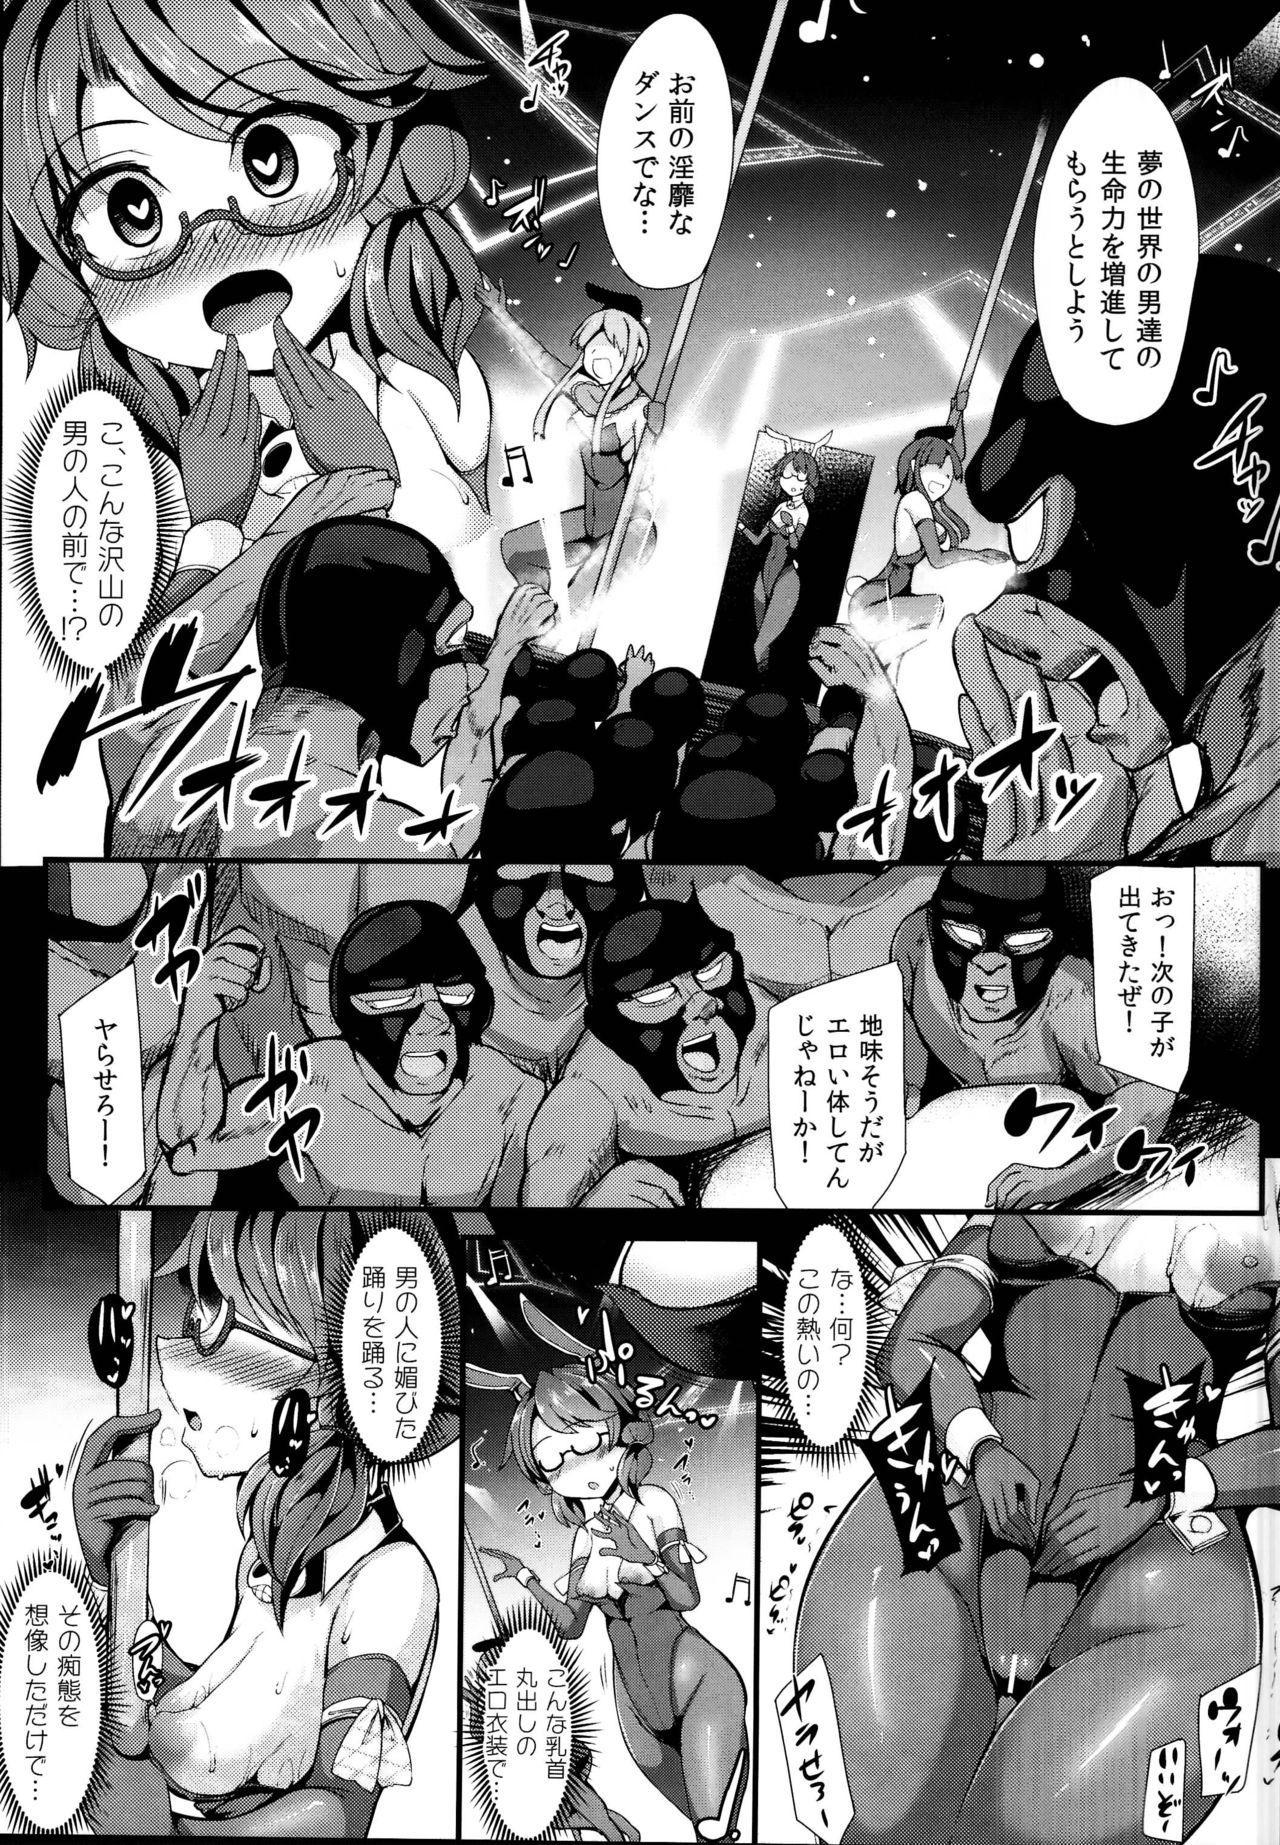 Bailando DANCING NIGHTMARE DIARY - Touhou project Pigtails - Page 11